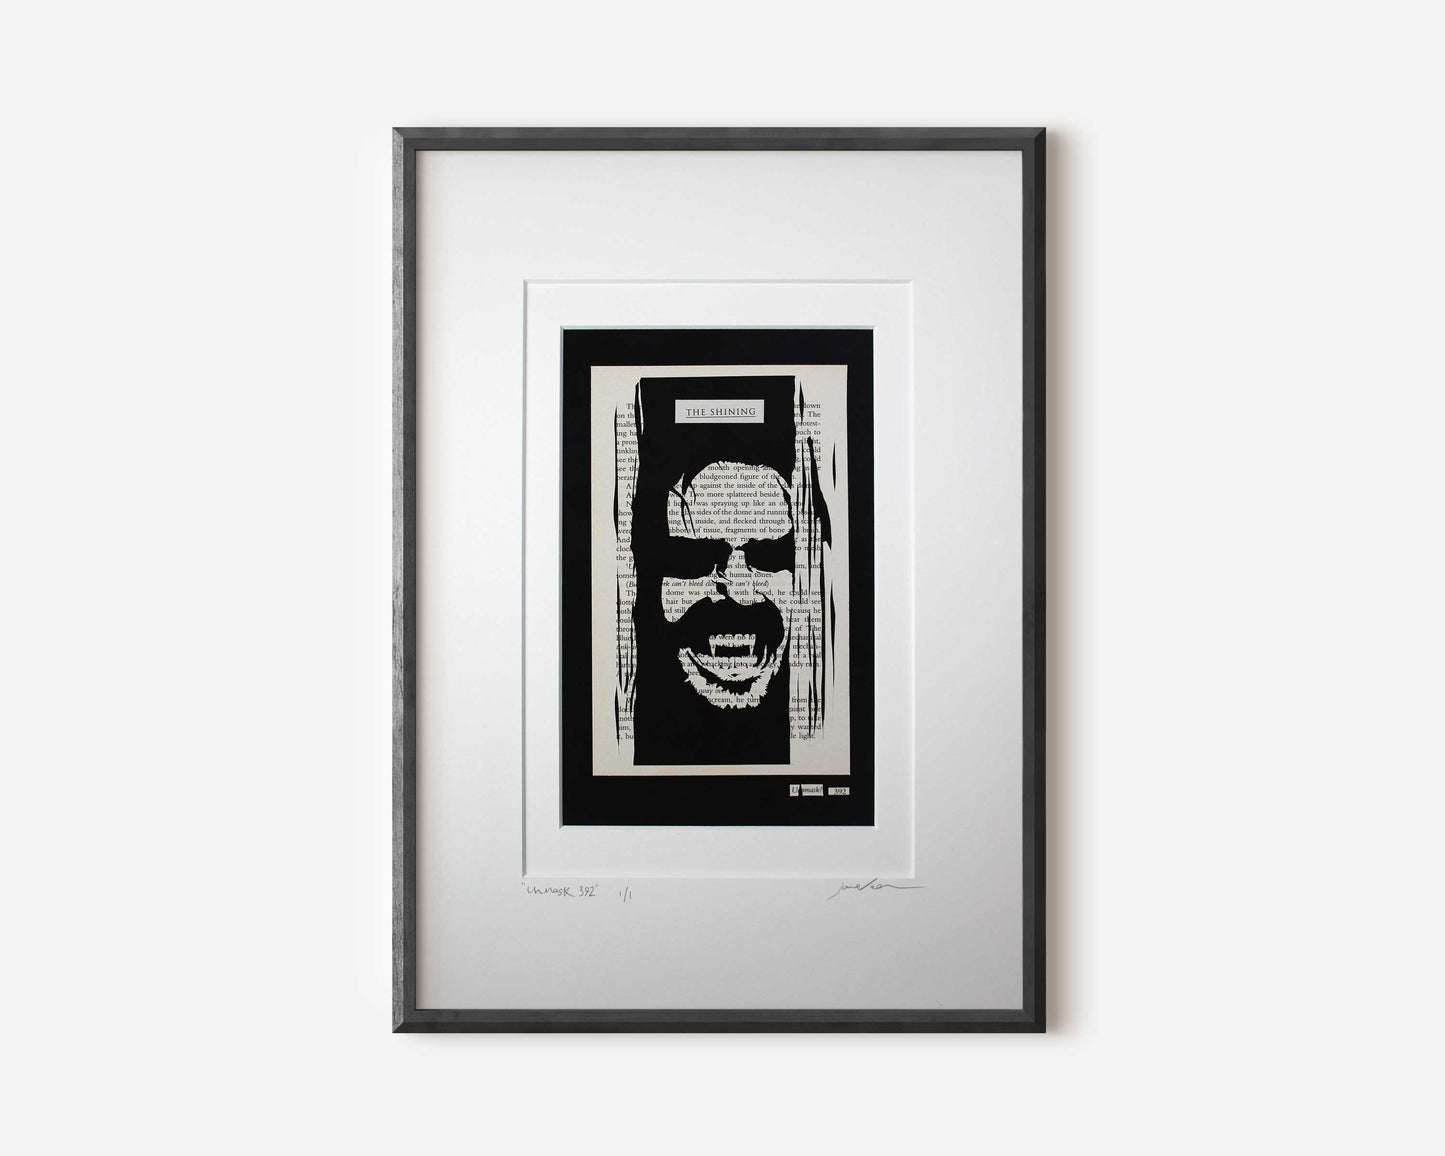 The Shining "Unmask! 392" 1/1 edition